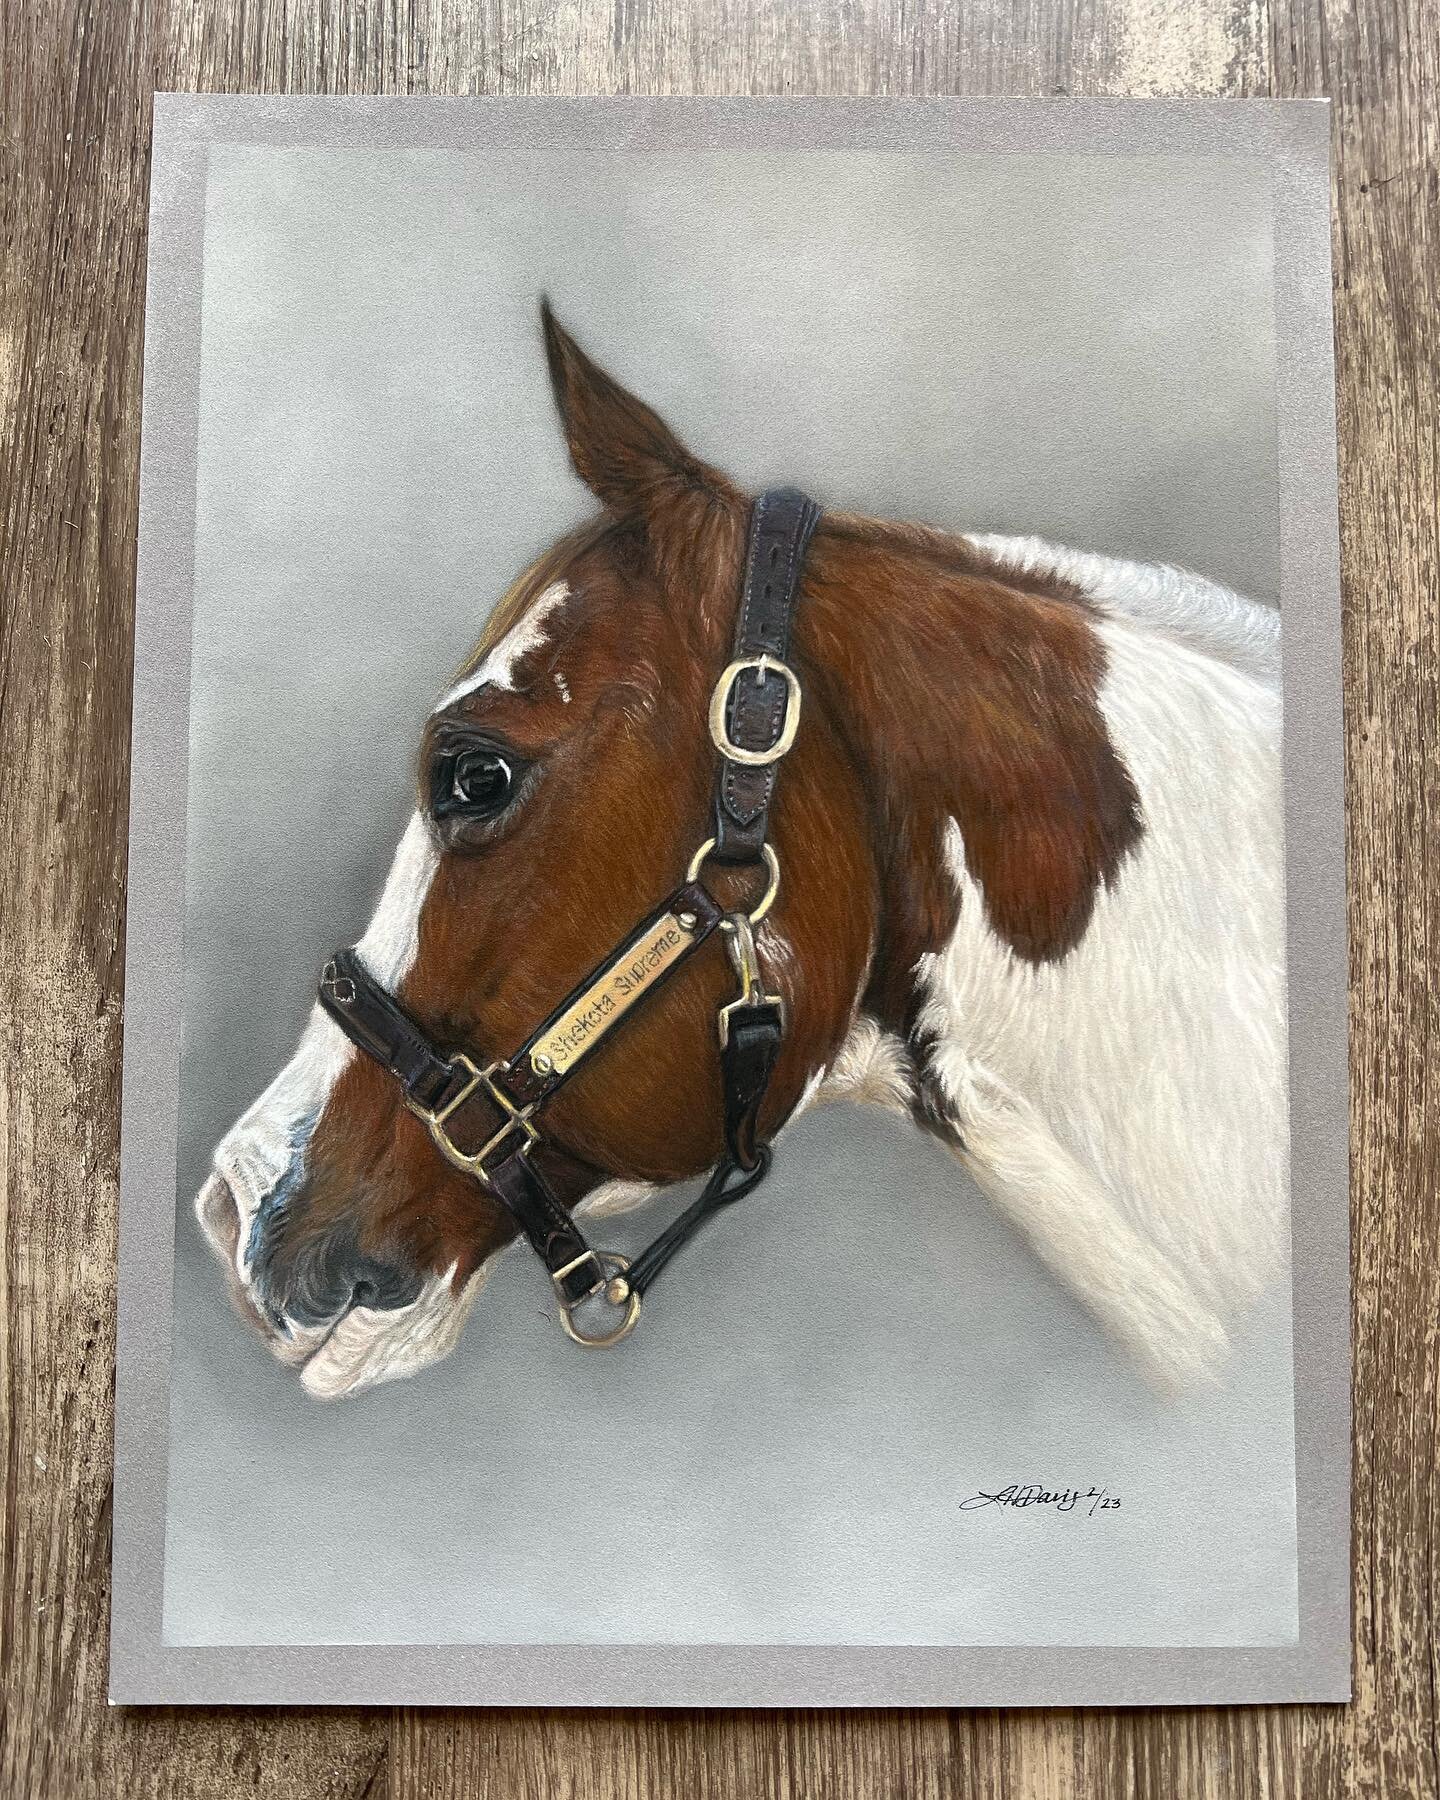 Here is the portrait I recently completed from a lil giveaway I did a few months ago 🤗 May I present the lovely Shekota 🐴! @hiddenwhiteacres 

9&rdquo; x 12&rdquo; pastel on pastelmat
#equineart #equineartist
#equineportrait #equinecommission #anim